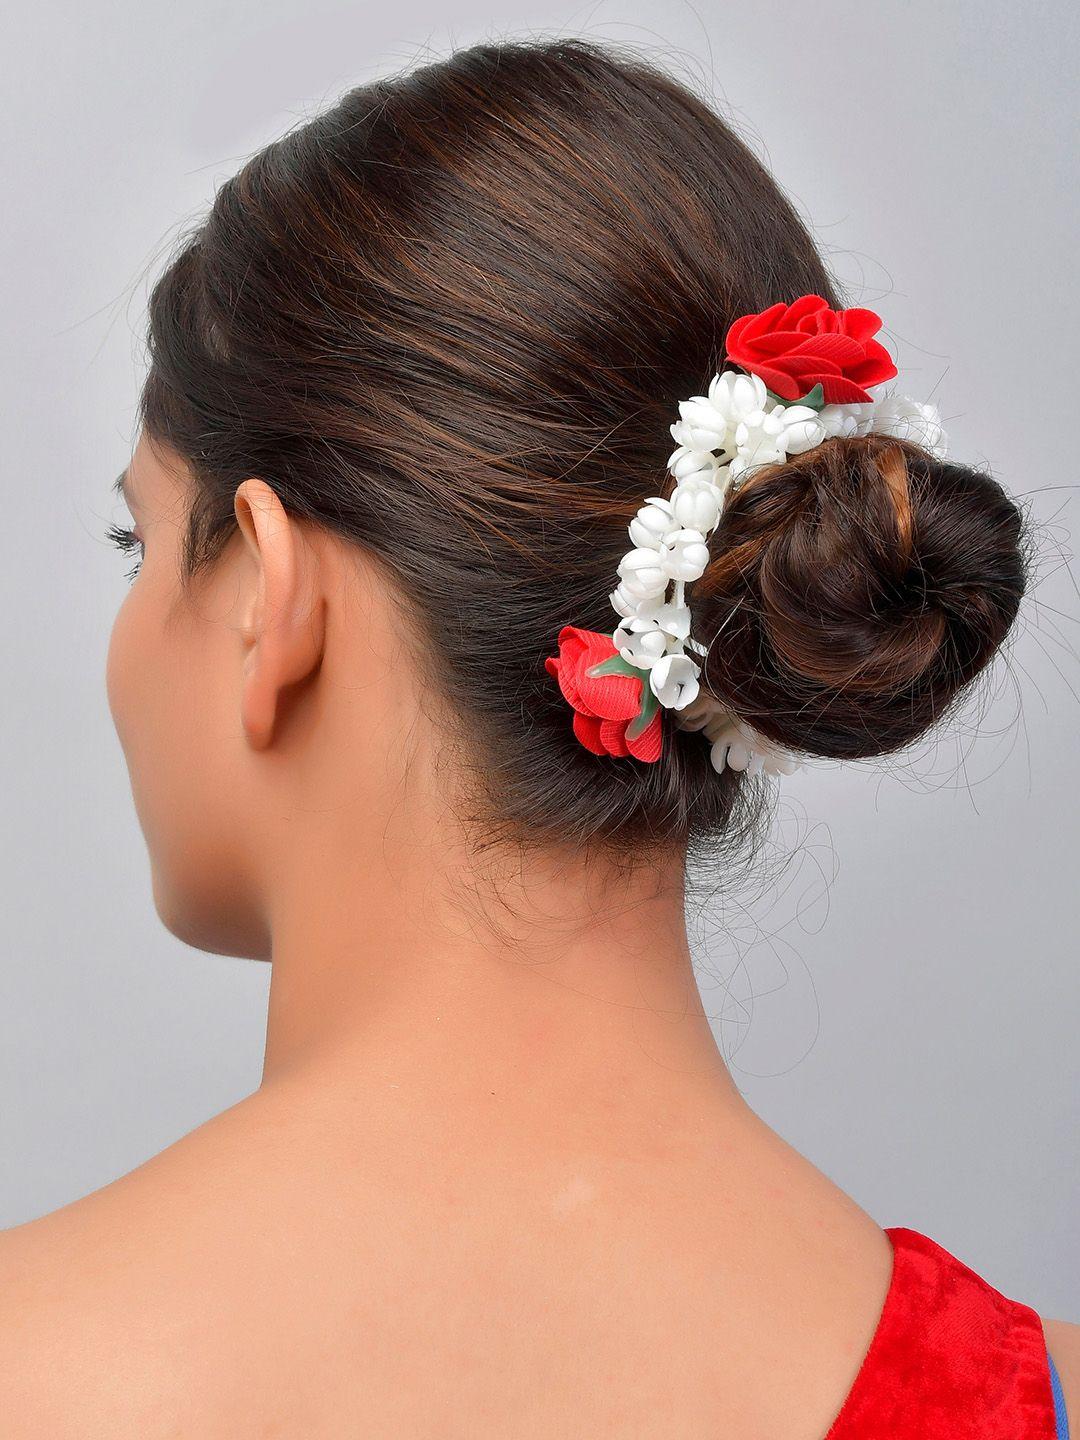 silvermerc designs women white & red lace hair accessory